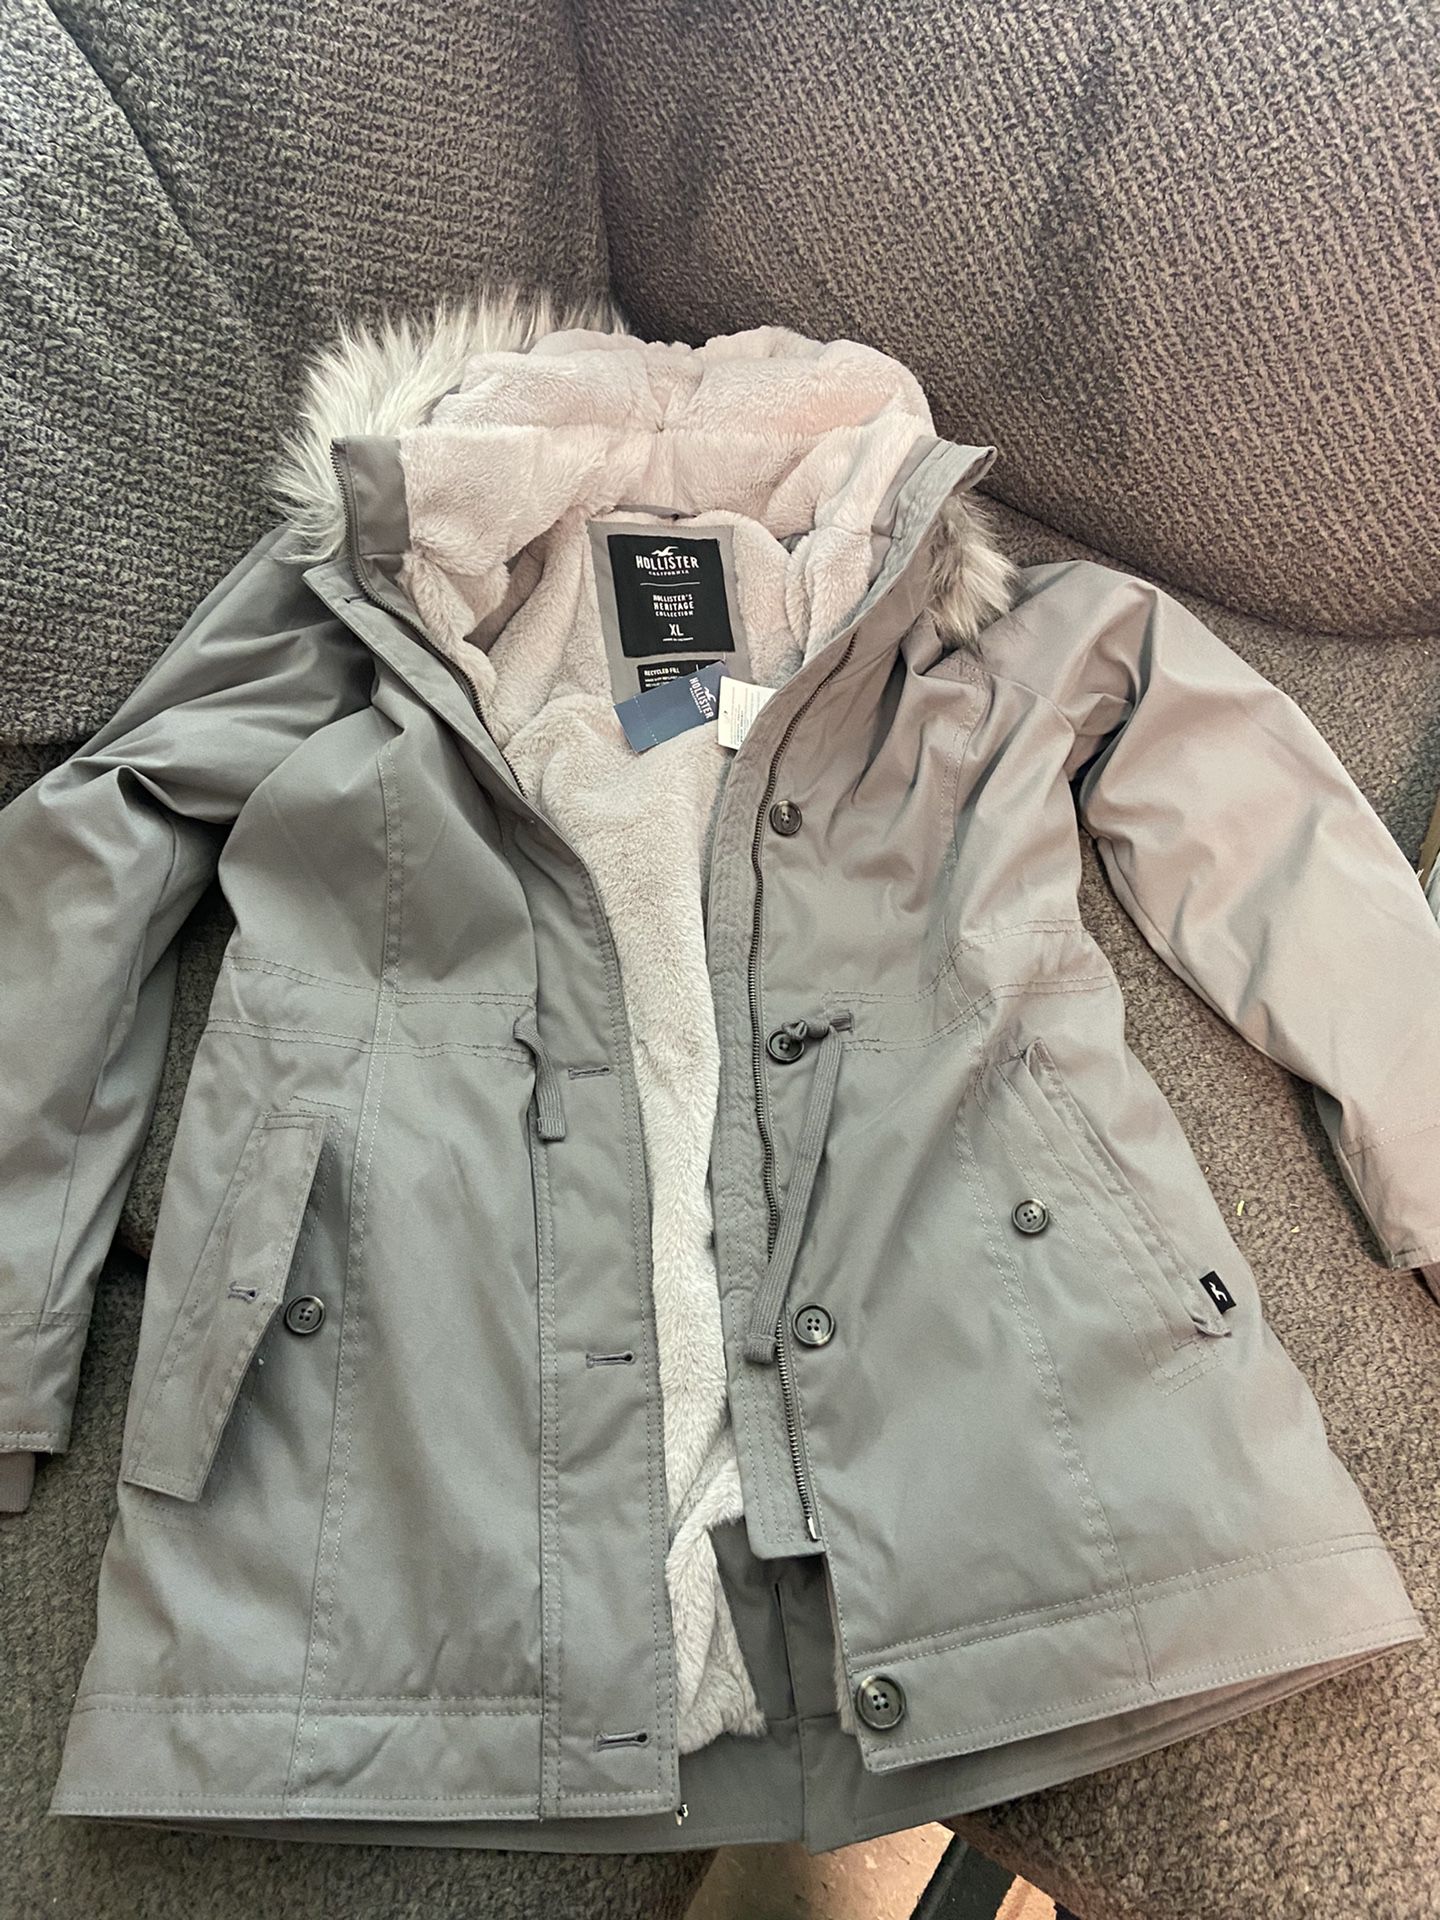 HOLLISTER HERITAGE COLLECTION COAT SIZE SMALL